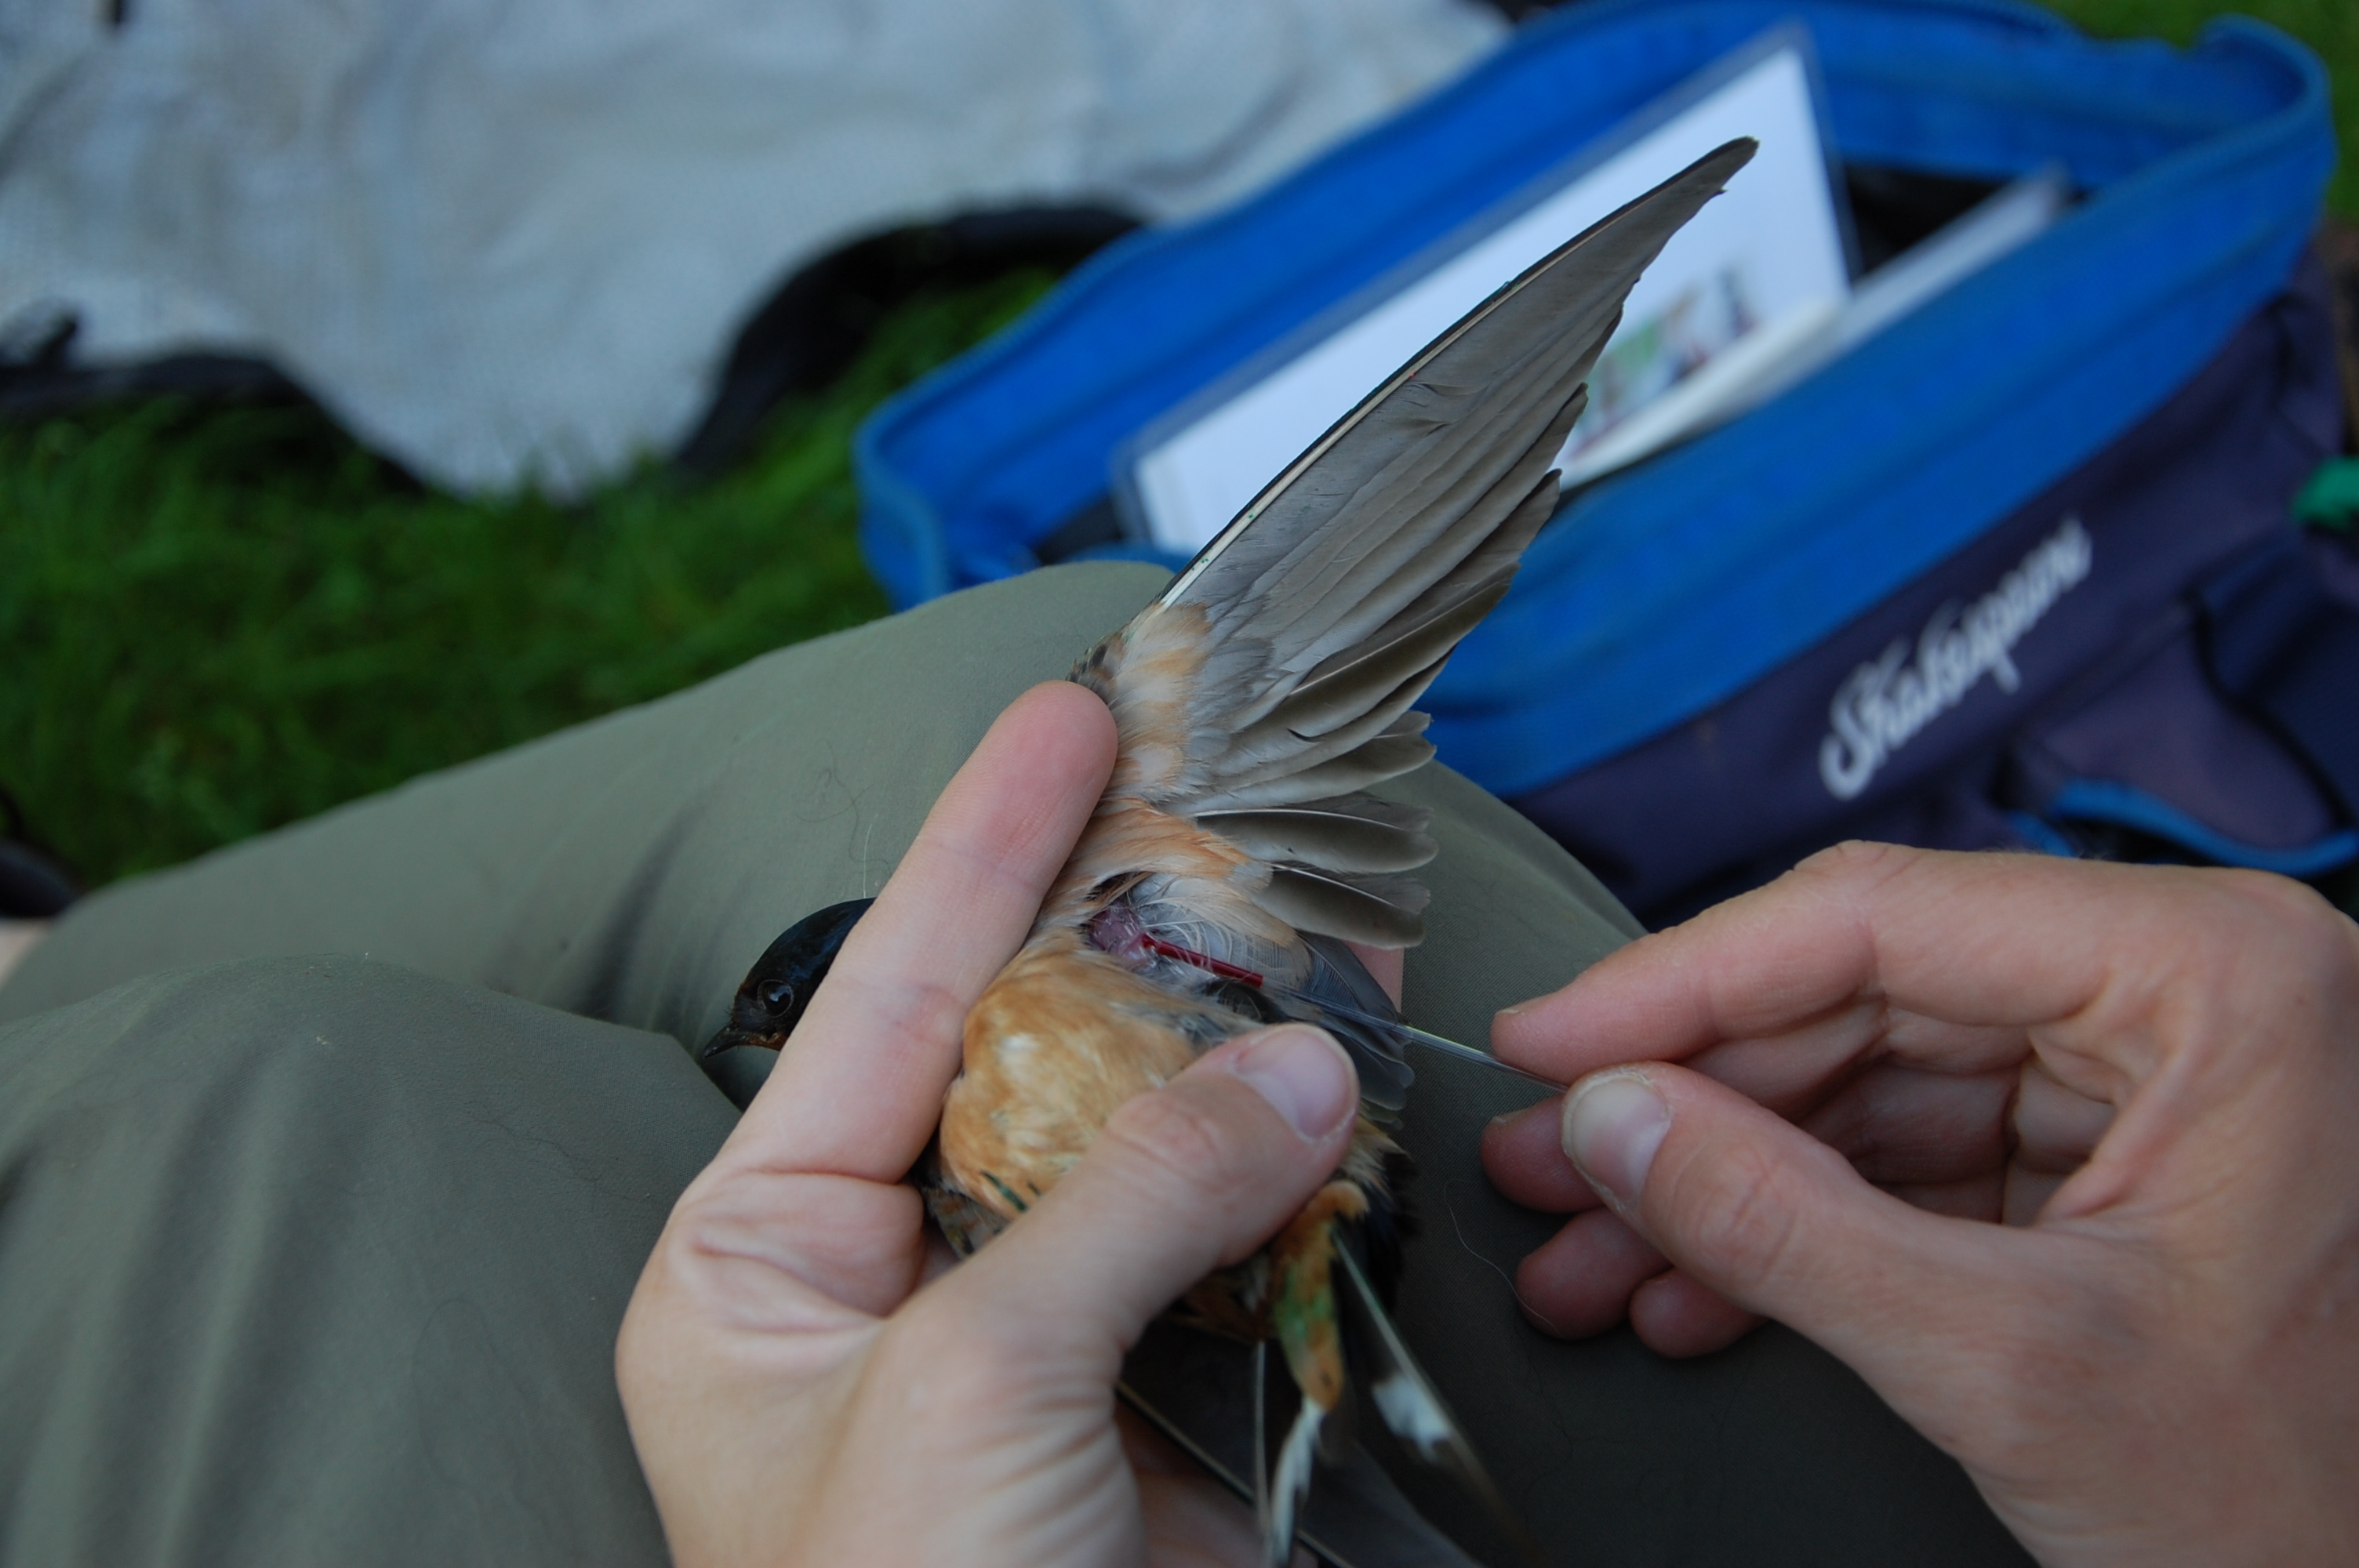 blood sample being taken from a swallow